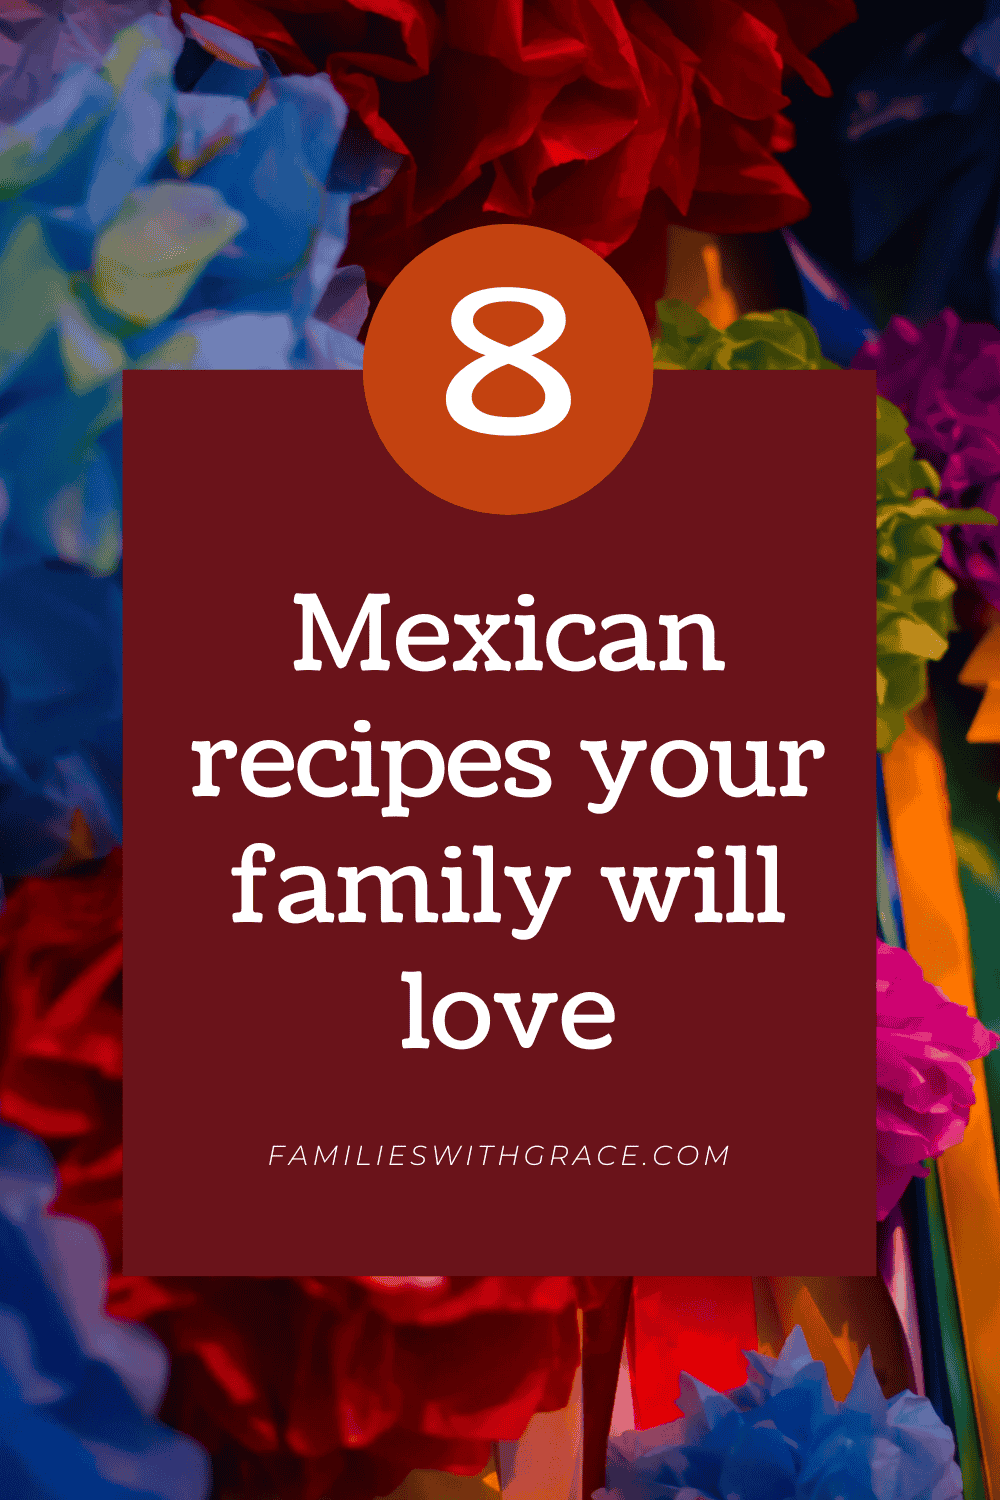 8 Mexican recipes your family will love